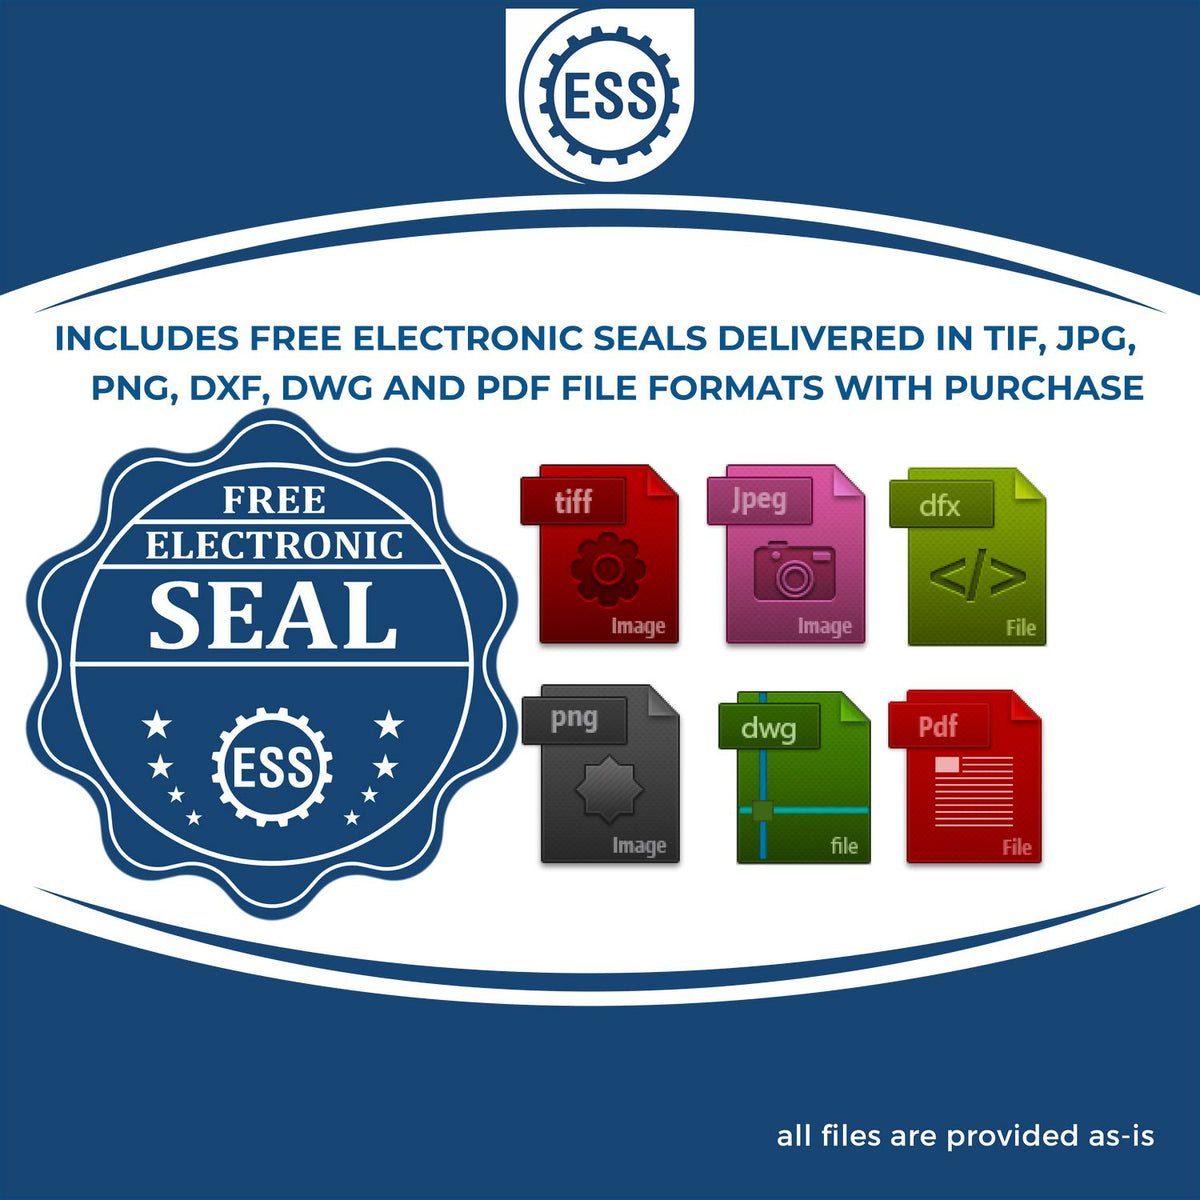 An infographic for the free electronic seal for the Premium MaxLight Pre-Inked Rhode Island Geology Stamp illustrating the different file type icons such as DXF, DWG, TIF, JPG and PNG.